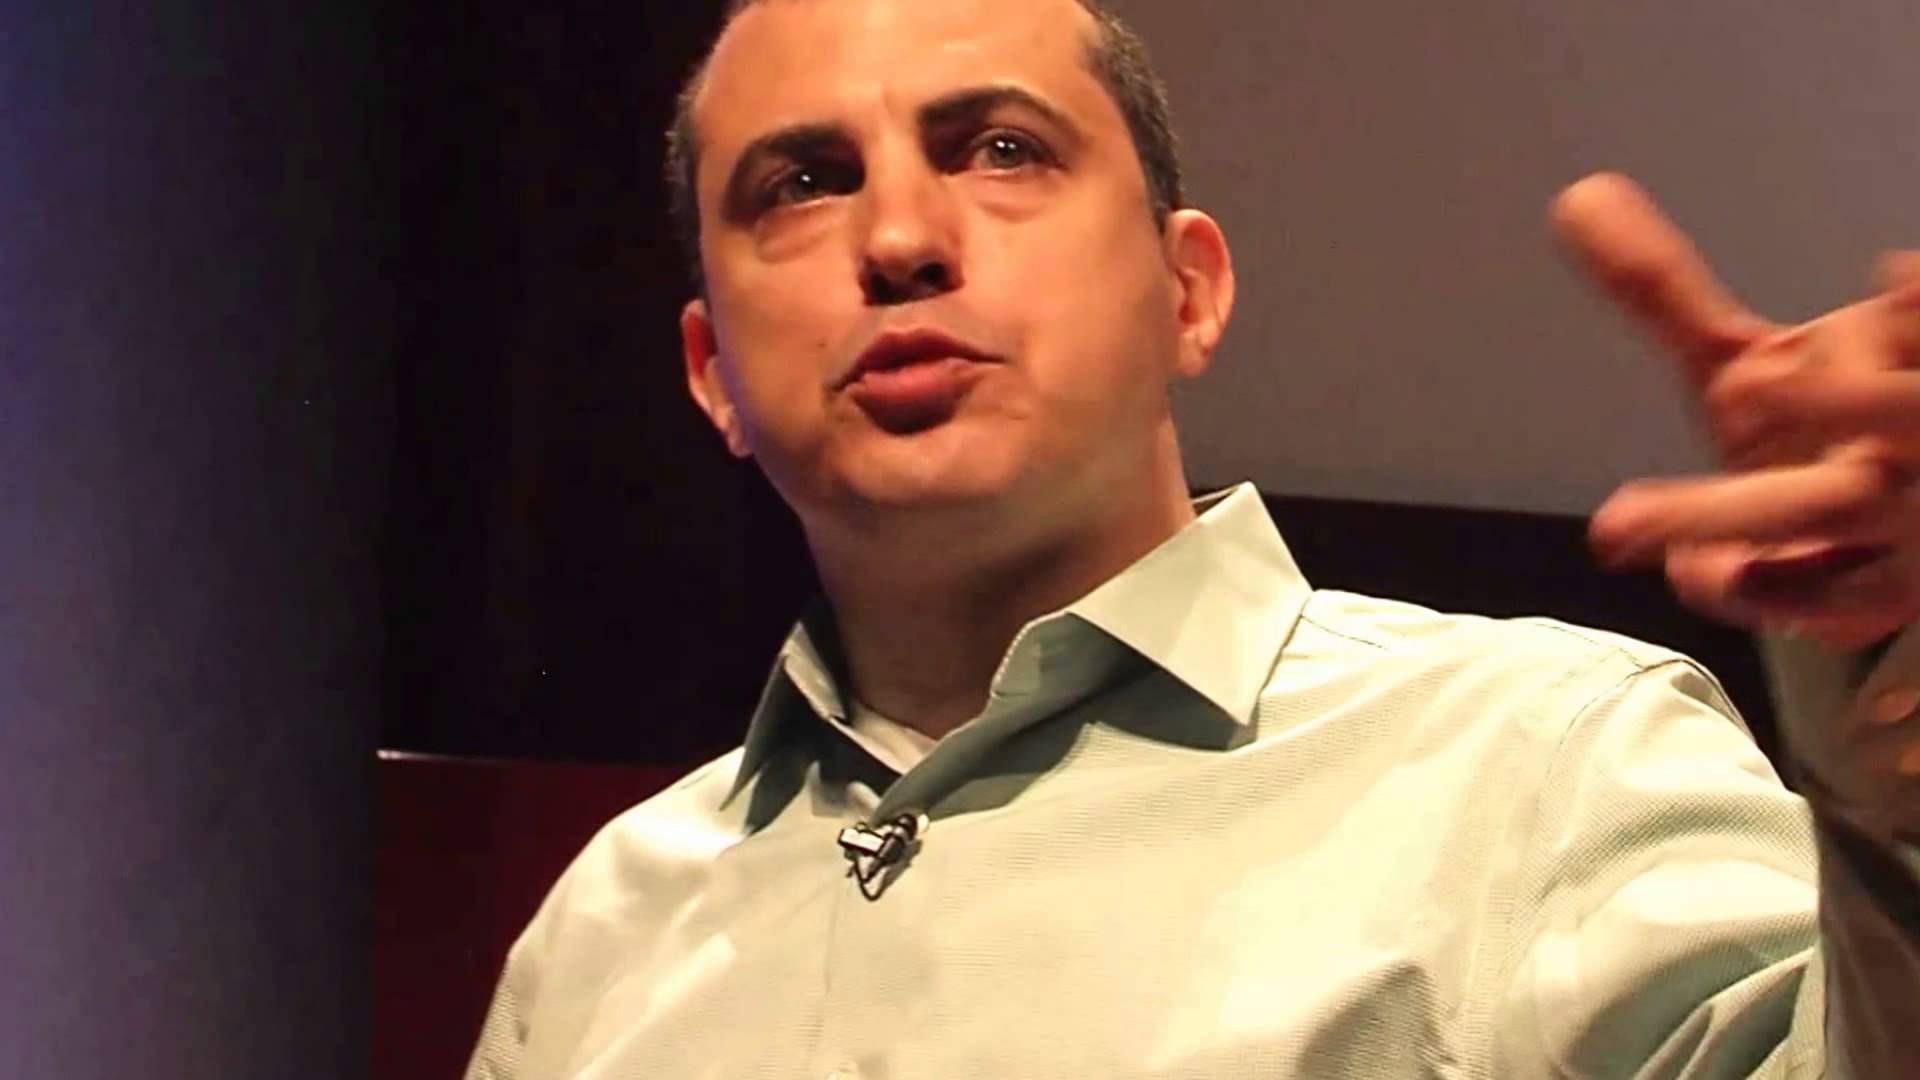 ‘They’re Missing the Point!’ - Antonopoulos Slams Banks’ Blockchain Romance